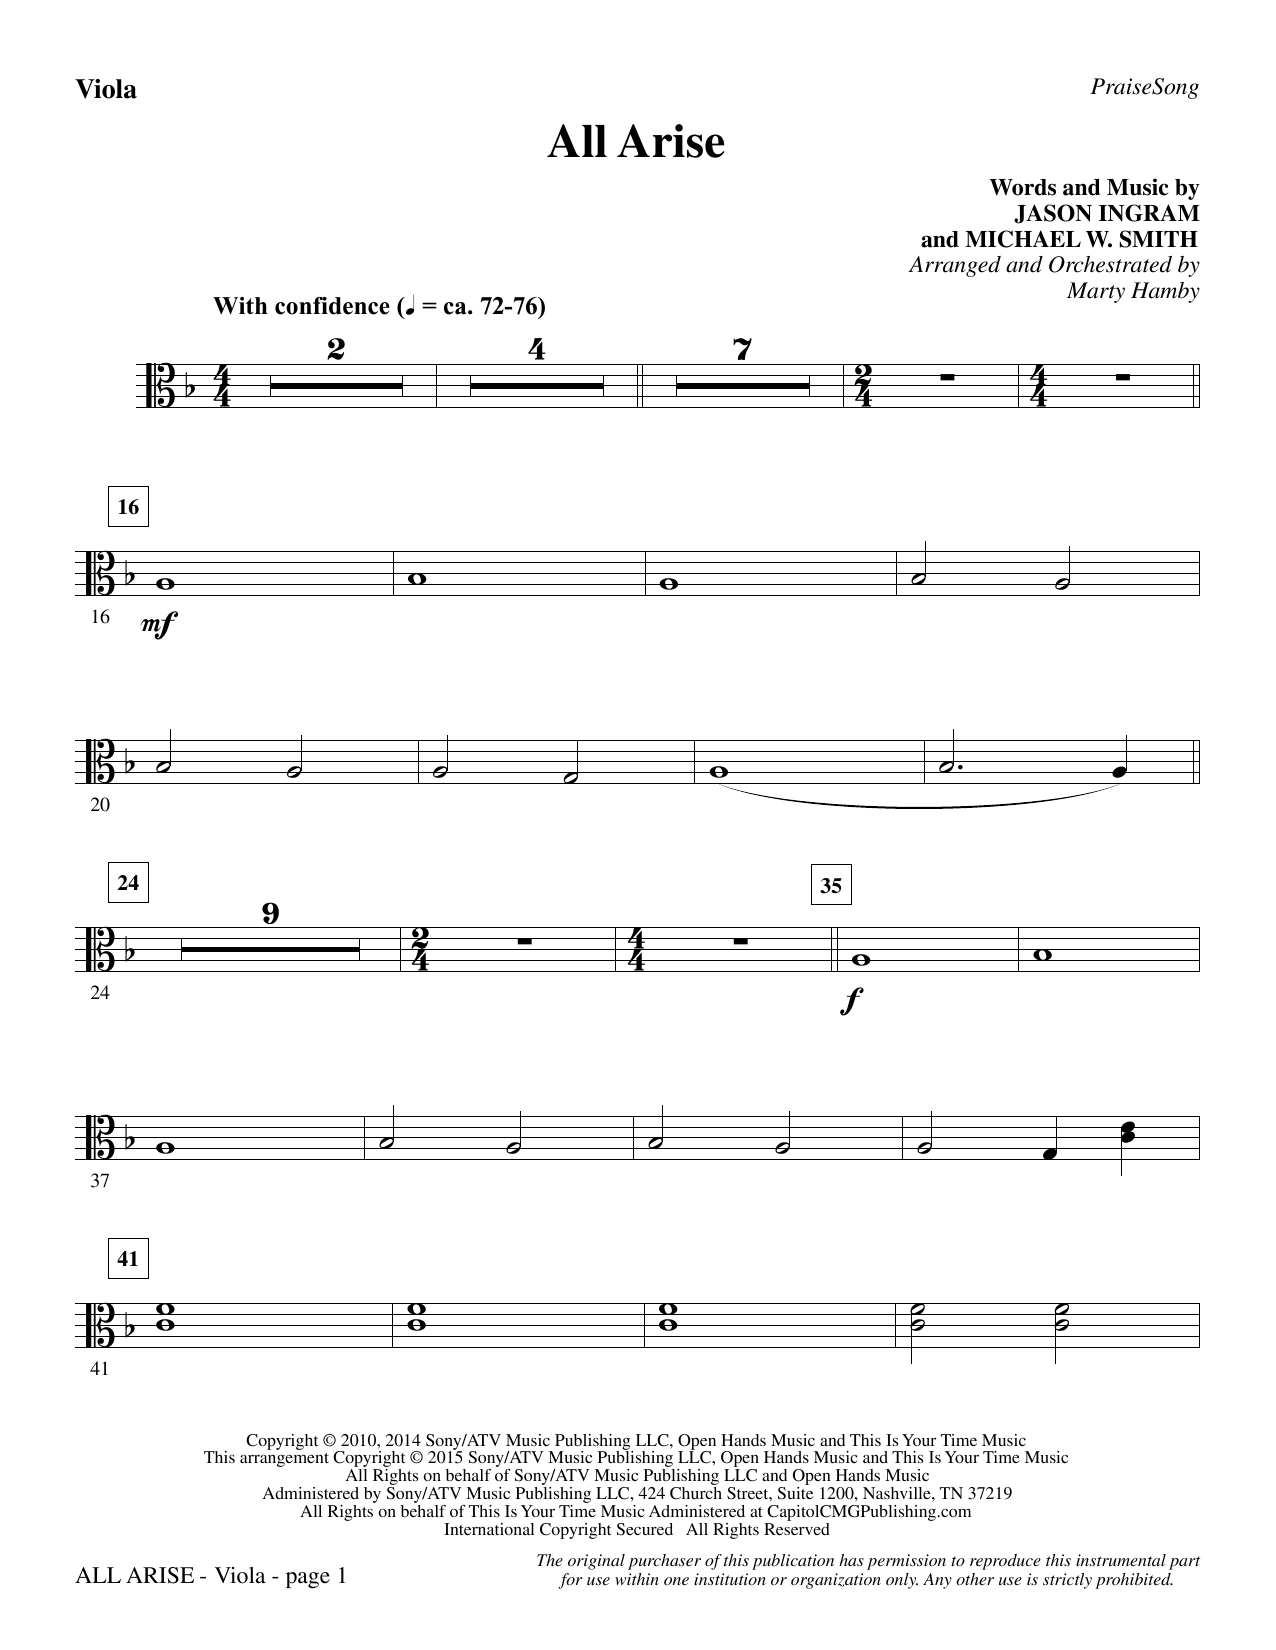 Marty Hamby All Arise - Viola sheet music notes and chords. Download Printable PDF.